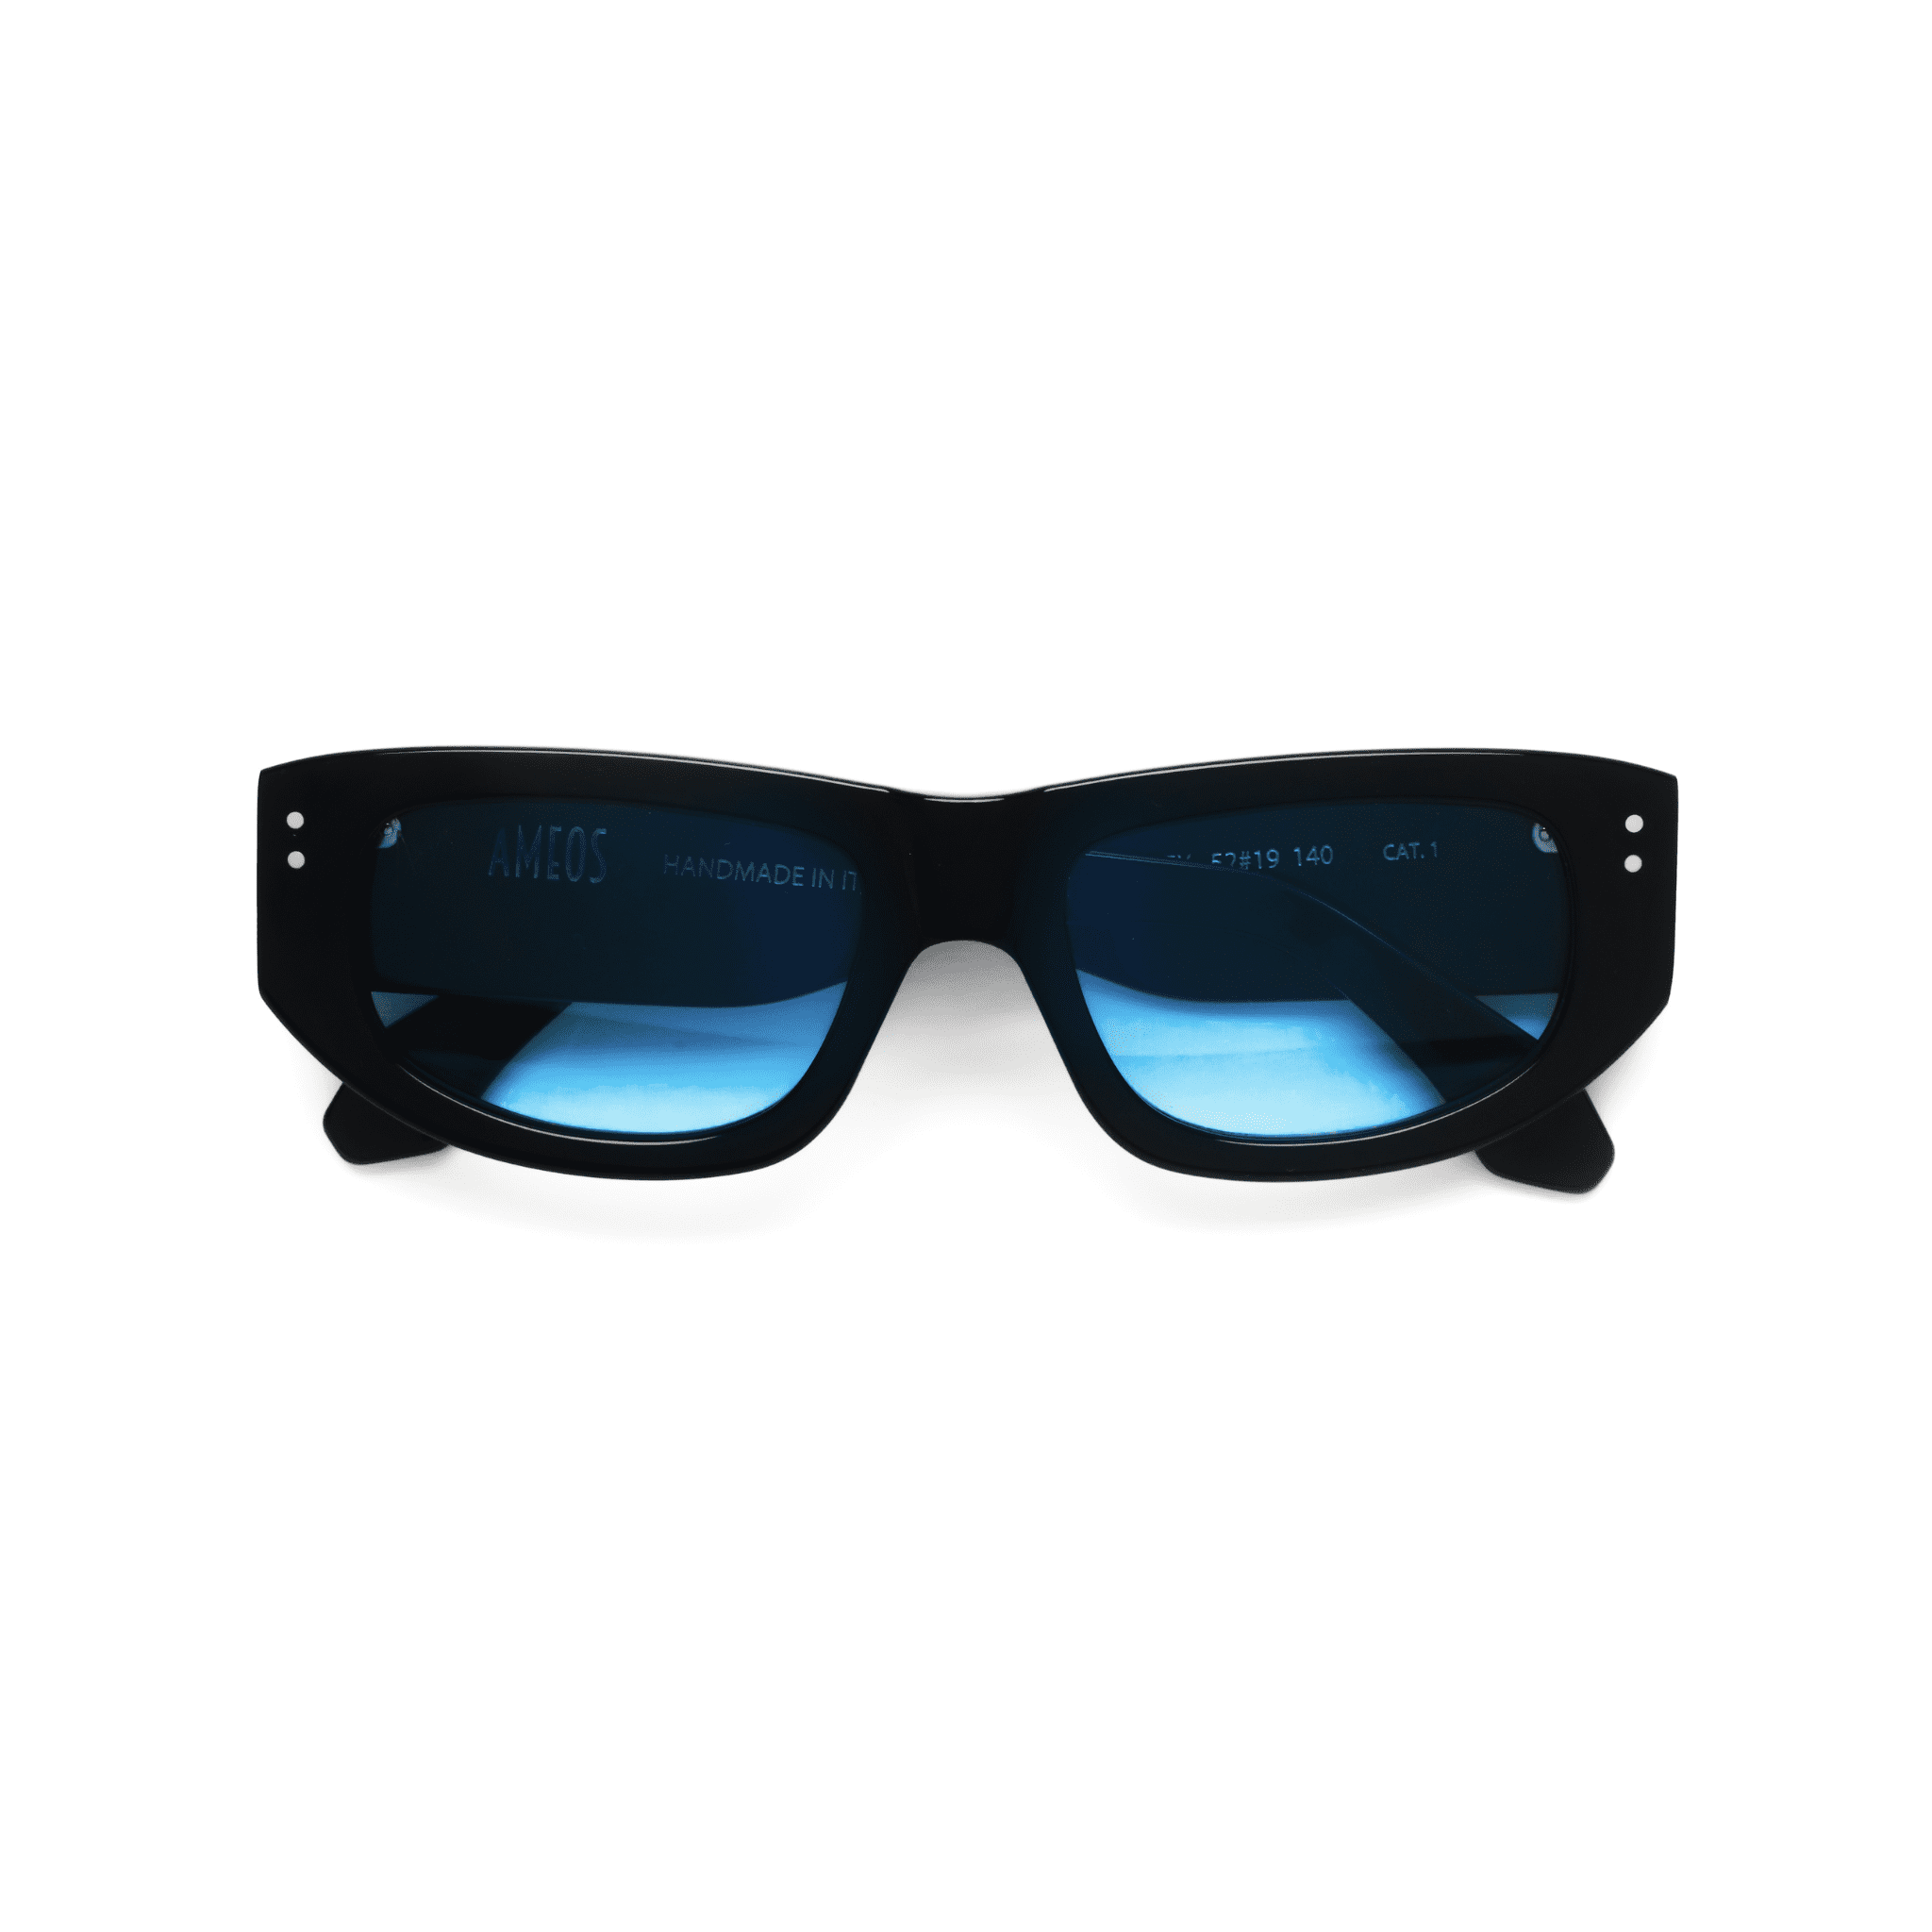 Ameos Forever collection Lex model. Black frames with turquoise lenses. Front view temples crossed. Genderless, gender neutral eyewear